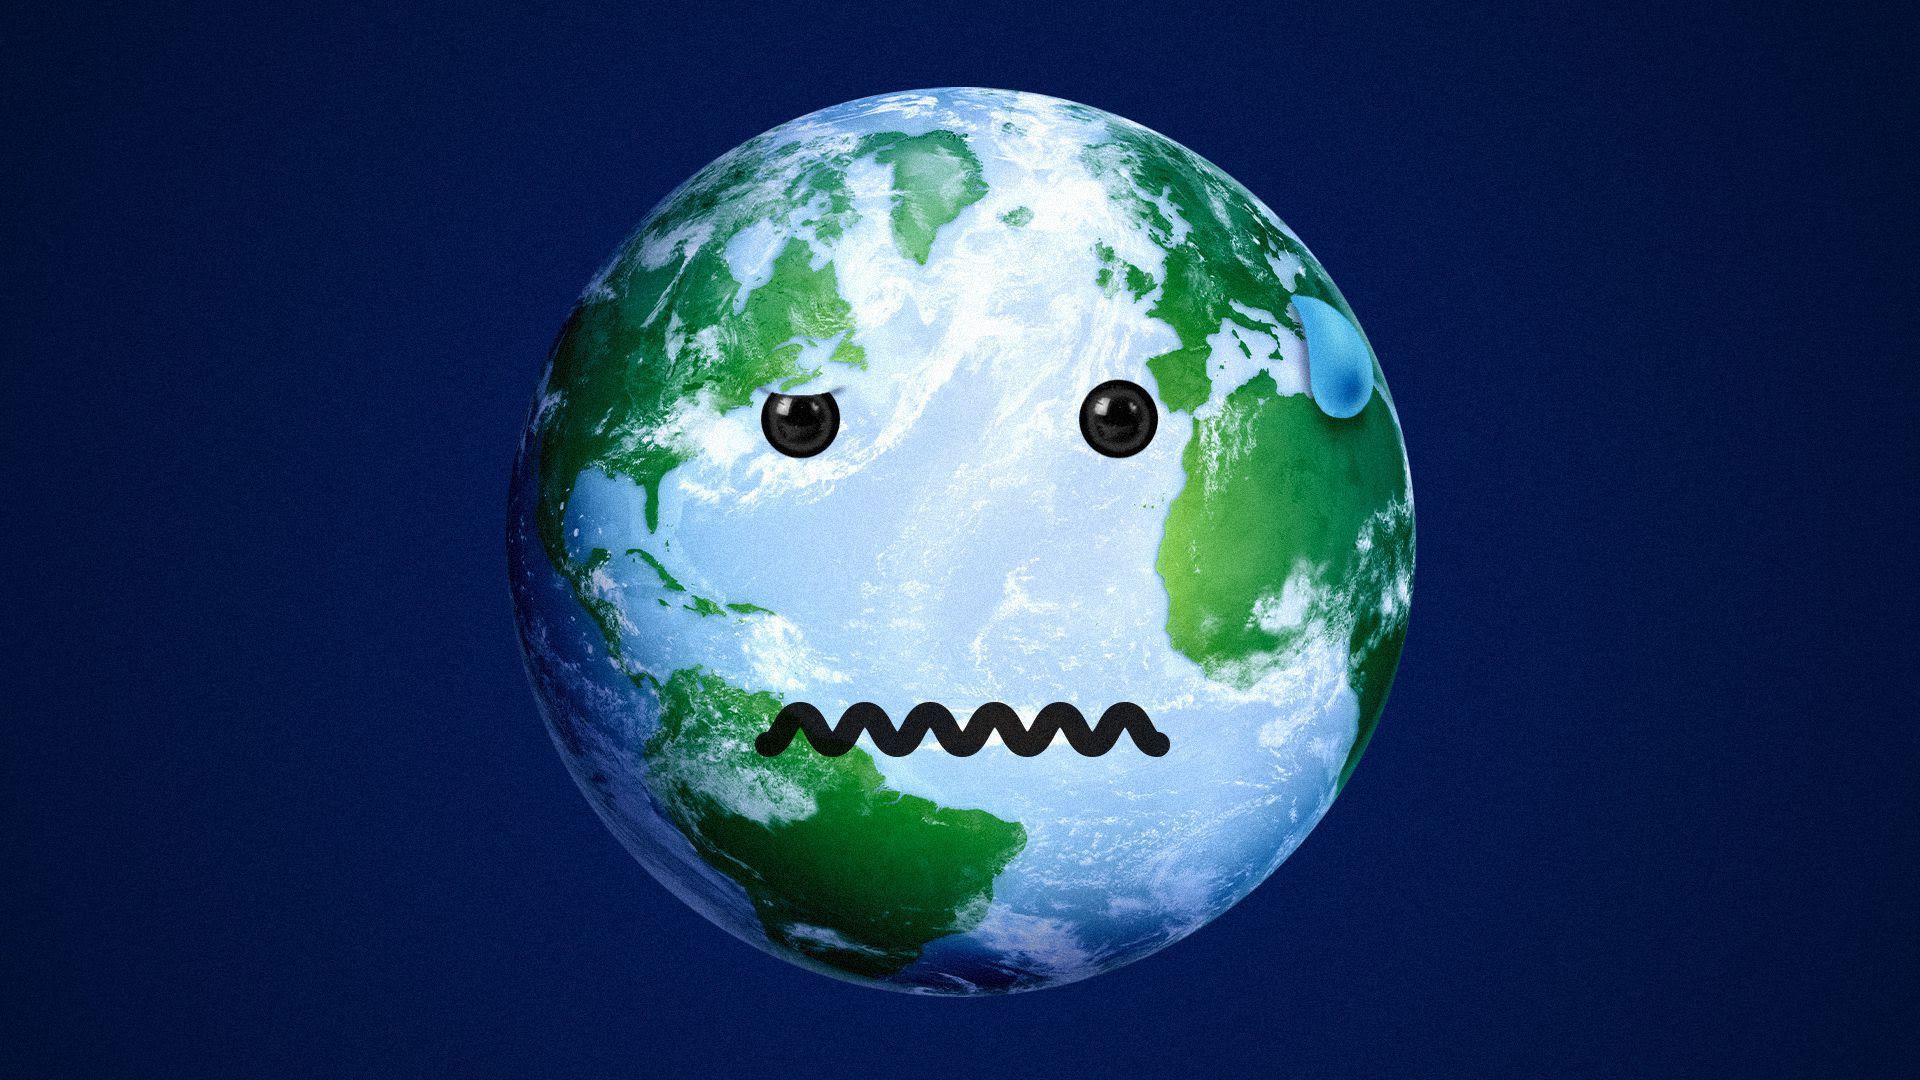 Illustration of the globe with an unhappy face on it.